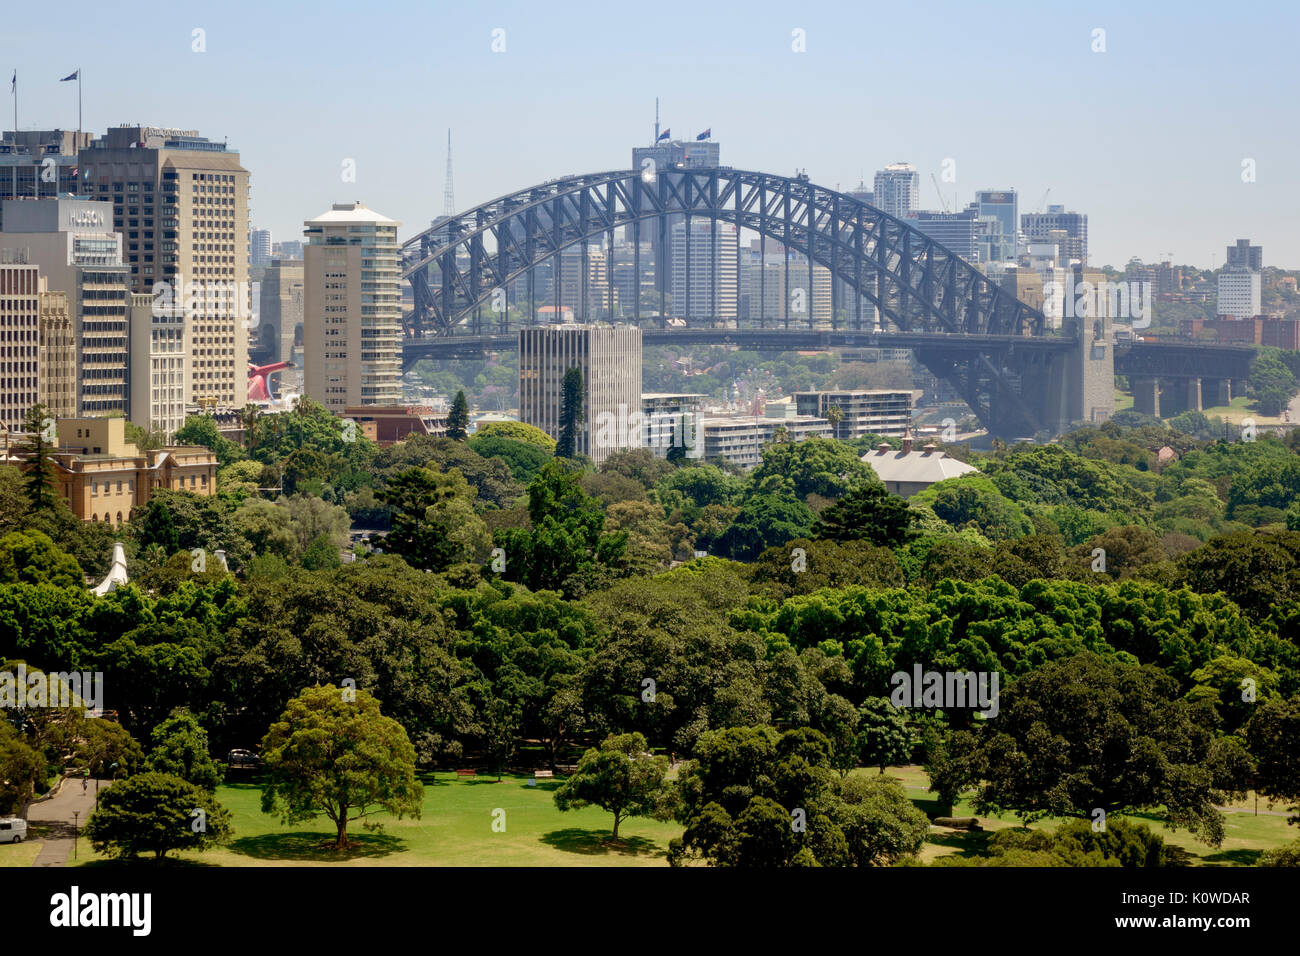 The Sydney Harbour Bridge And The Central Business District Australia The Domain Park Is In The Foreground, People Are Walking On Top Of The Bridge Stock Photo